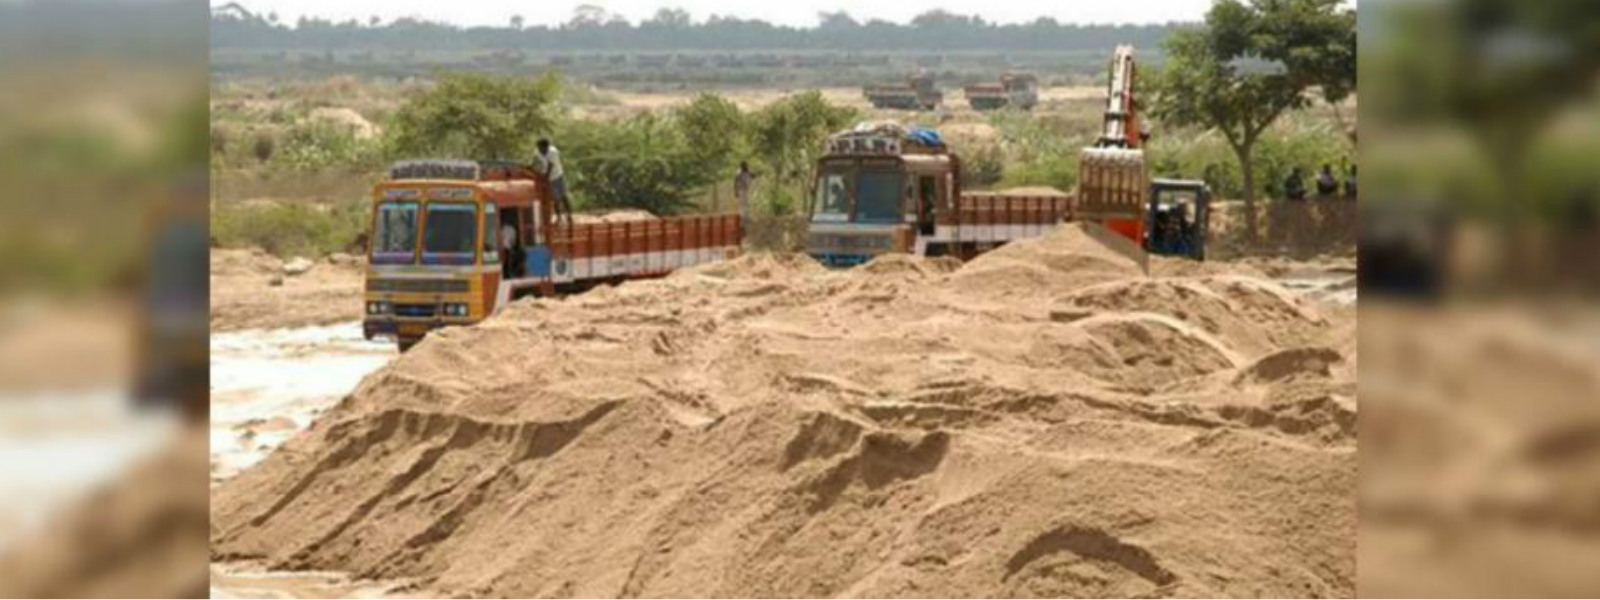 1500 applications for sand mining permits